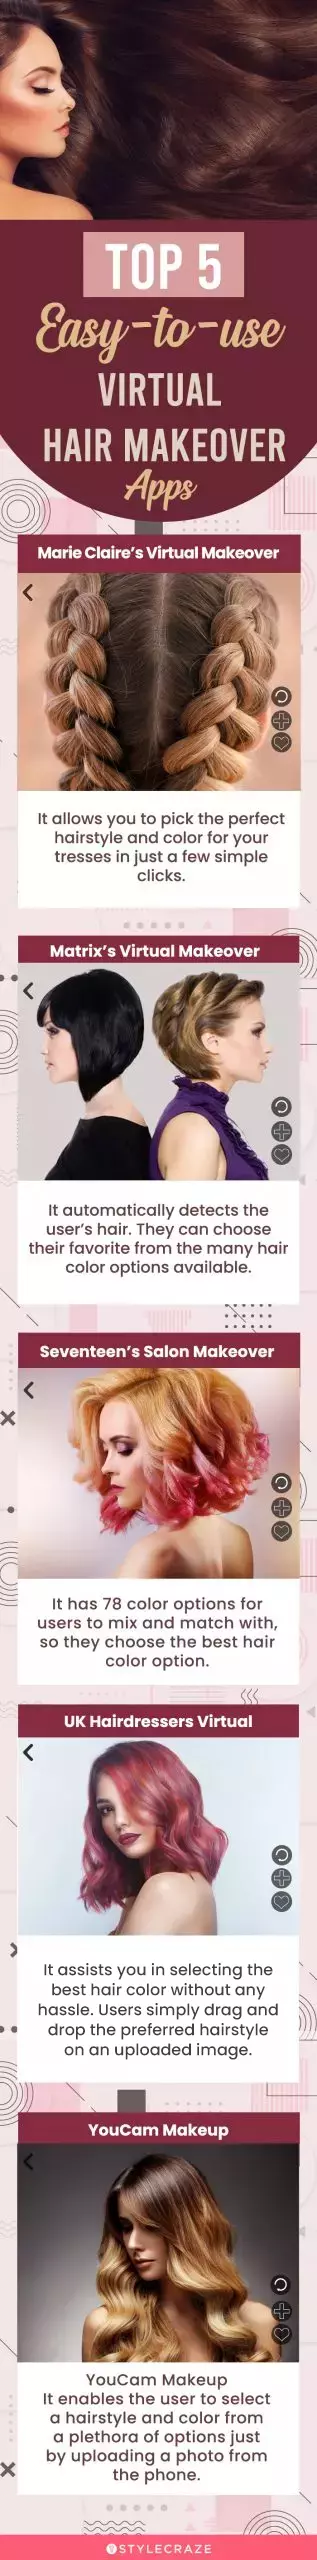 AI hairstyles - try on any hairstyle with AI | AI hairstyles